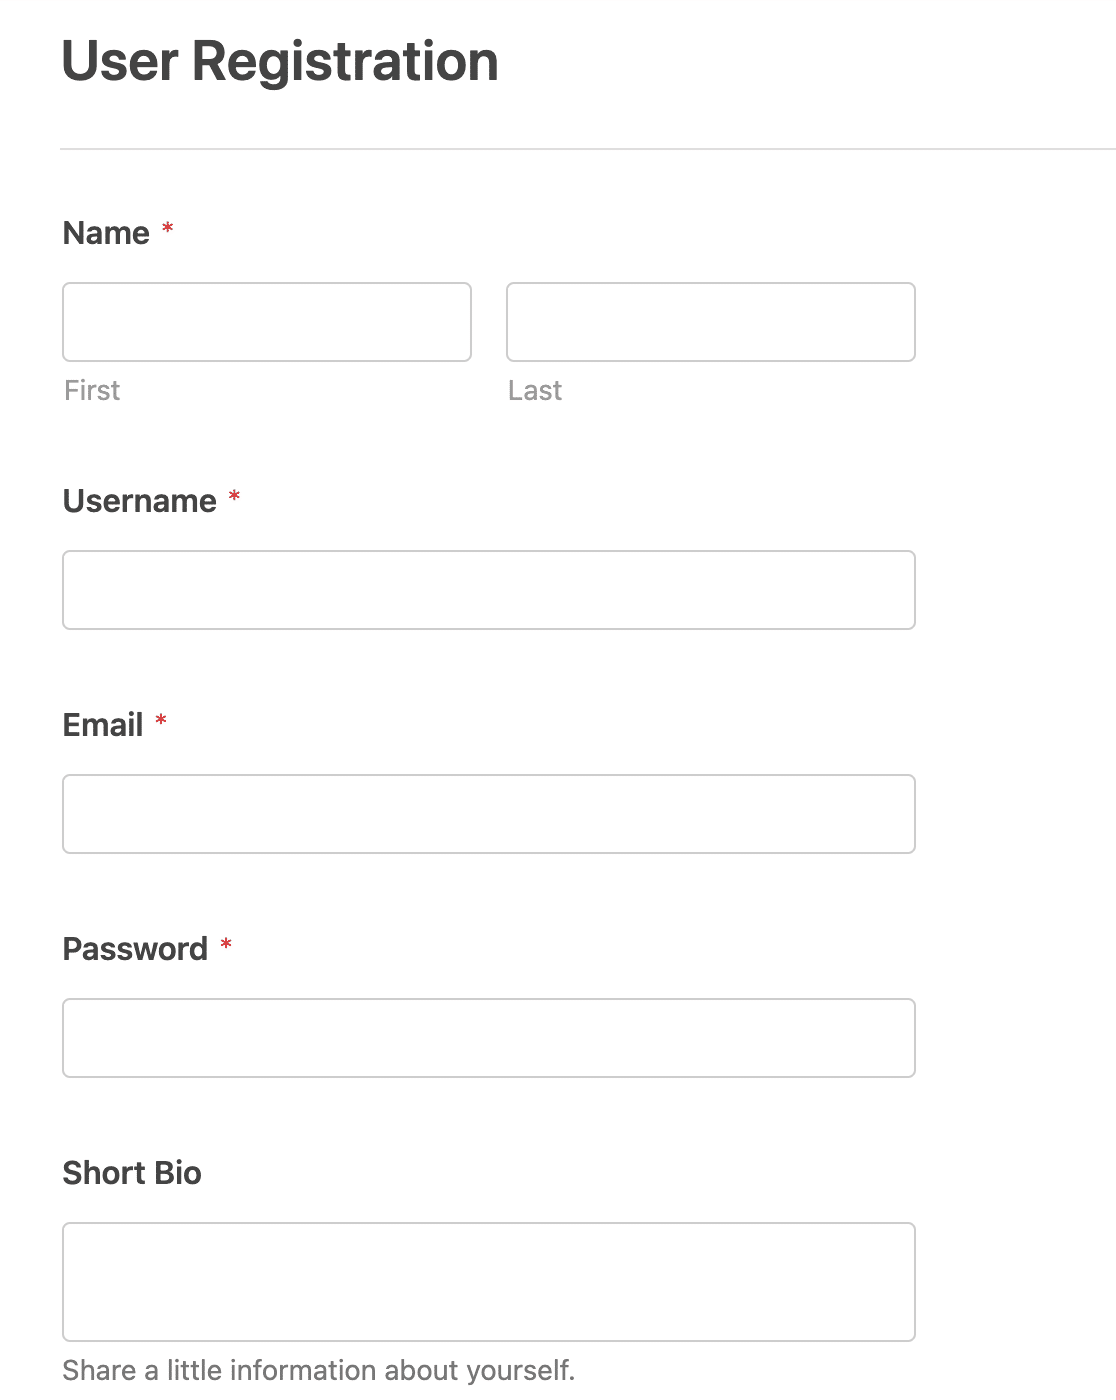 The User Registration template